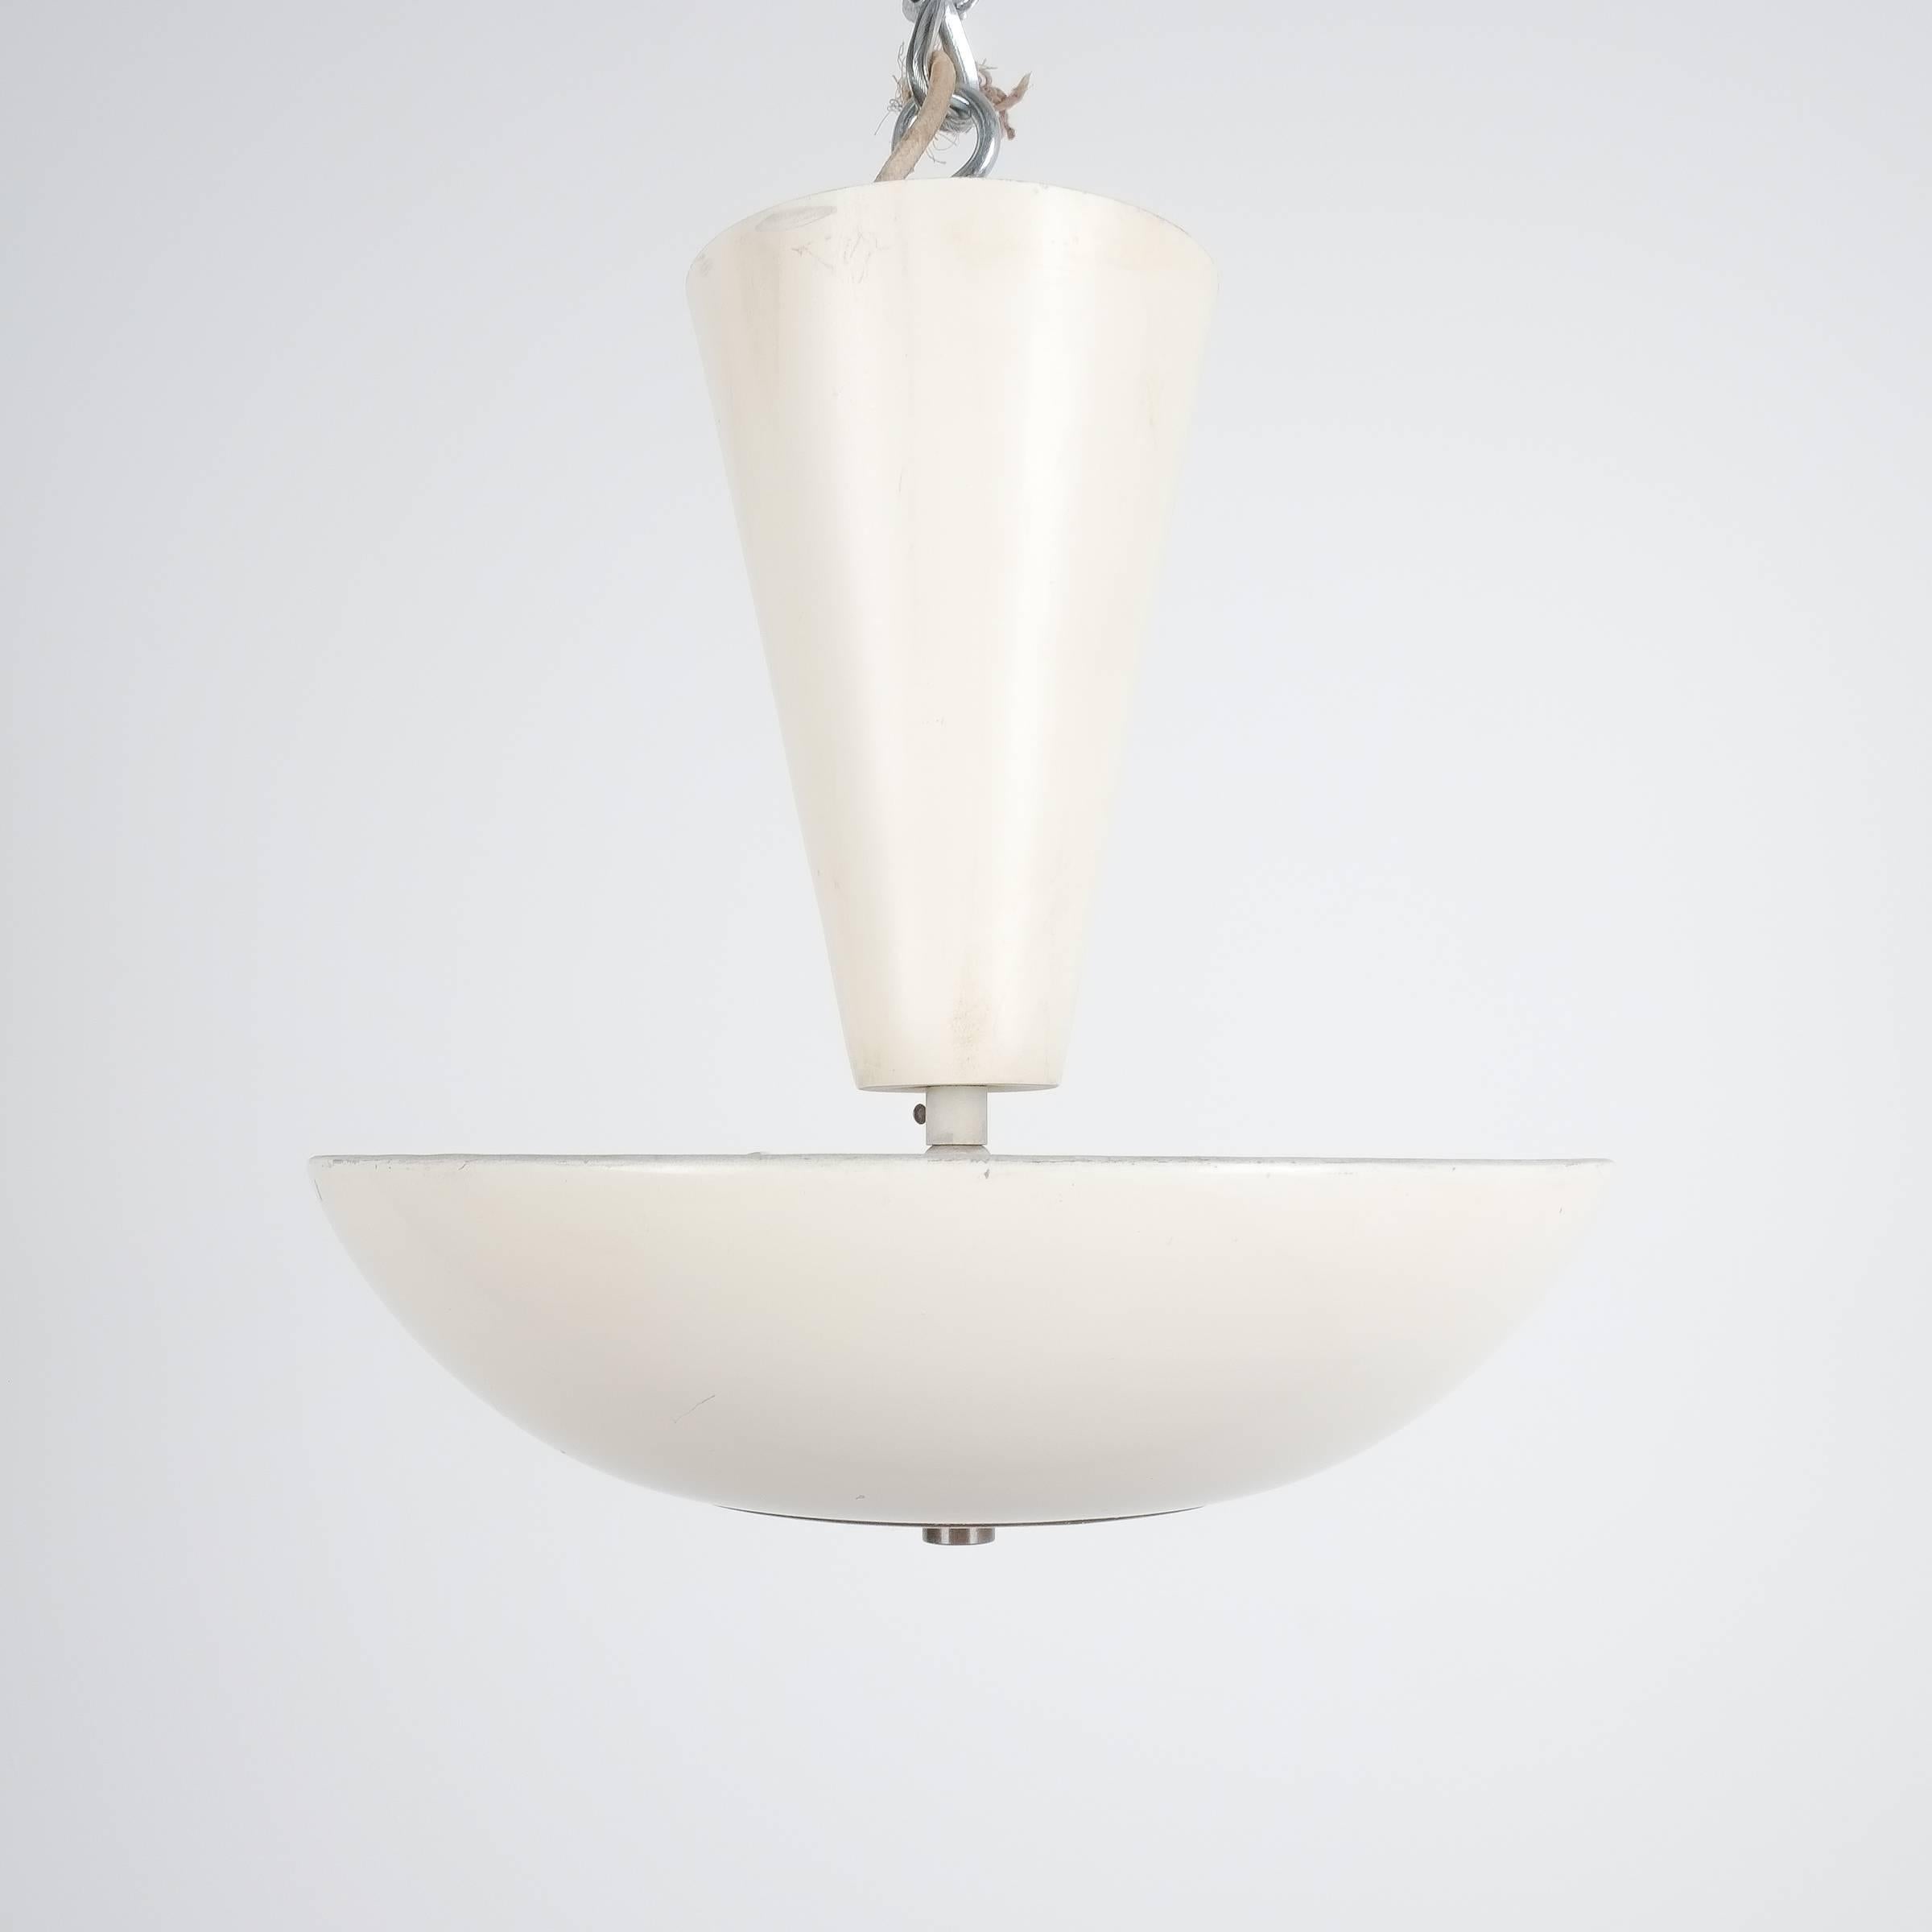 Gino Sarfatti Arteluce 3003 ceiling lamp or semi flush mounts, Italy, 1950. 

We have it currently on sale for 5k instead of $6900 per piece.

Two pieces available, priced and sold individually. Desirable white (egg-shell) painted aluminum light